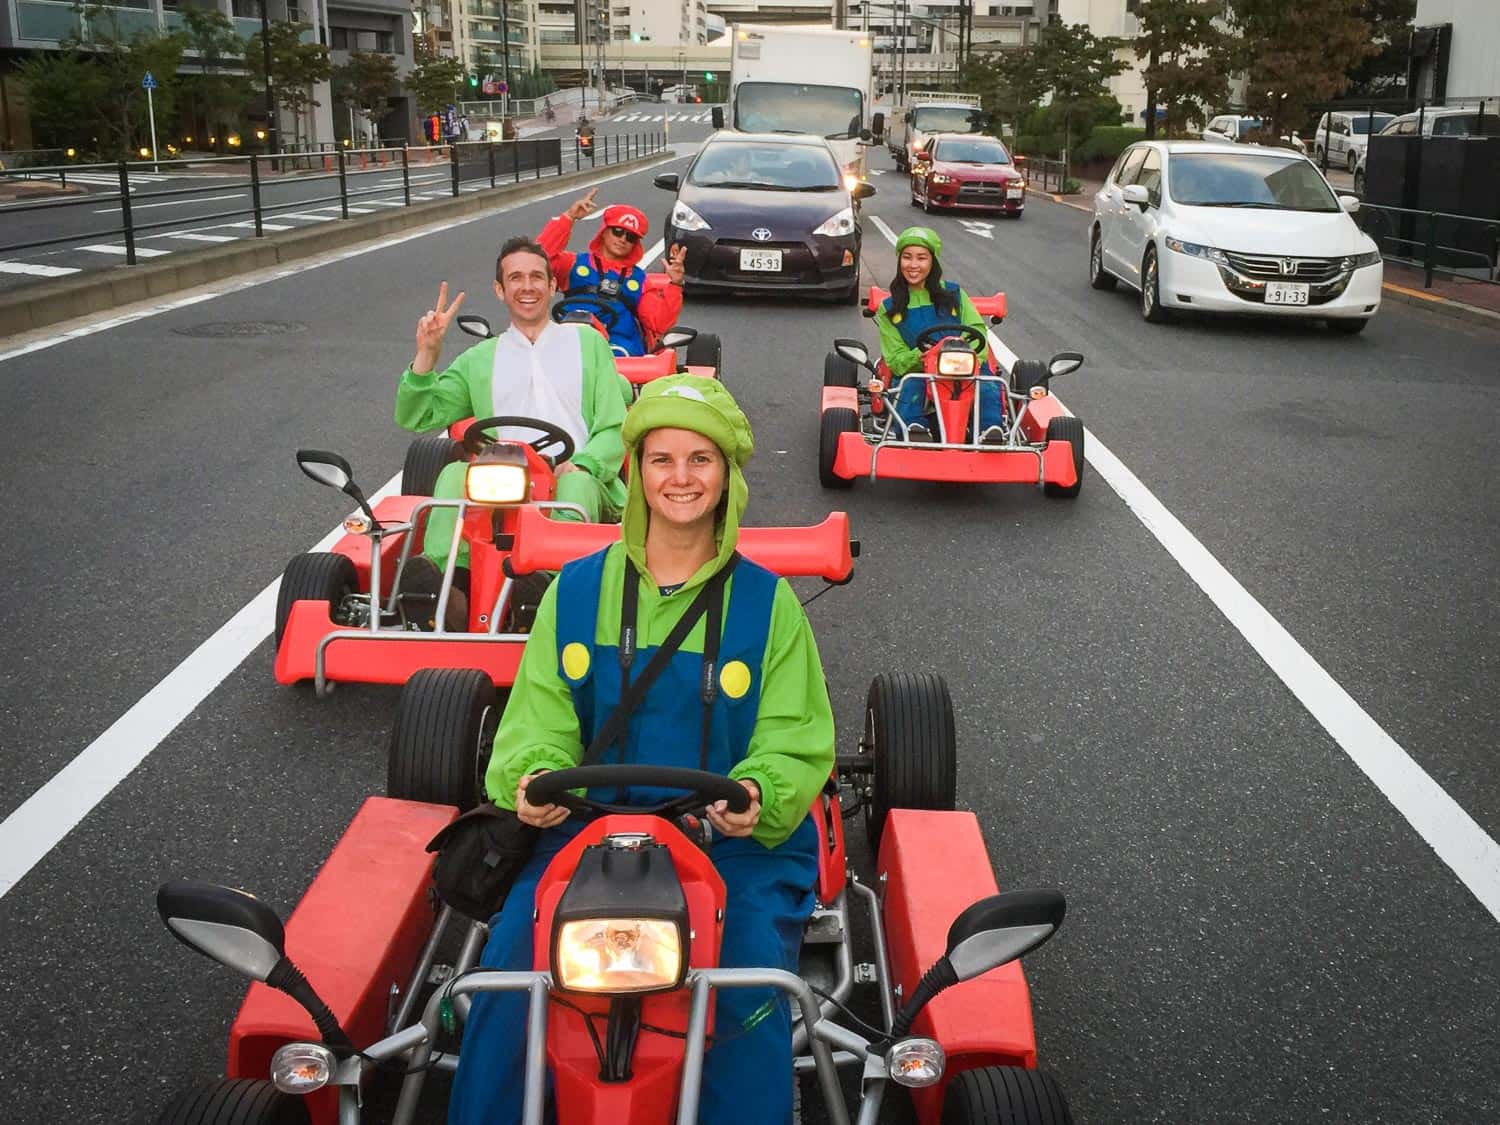 Dressing up as Mario characters and driving a Maricar go-kart is one of the many fun things to do in Tokyo